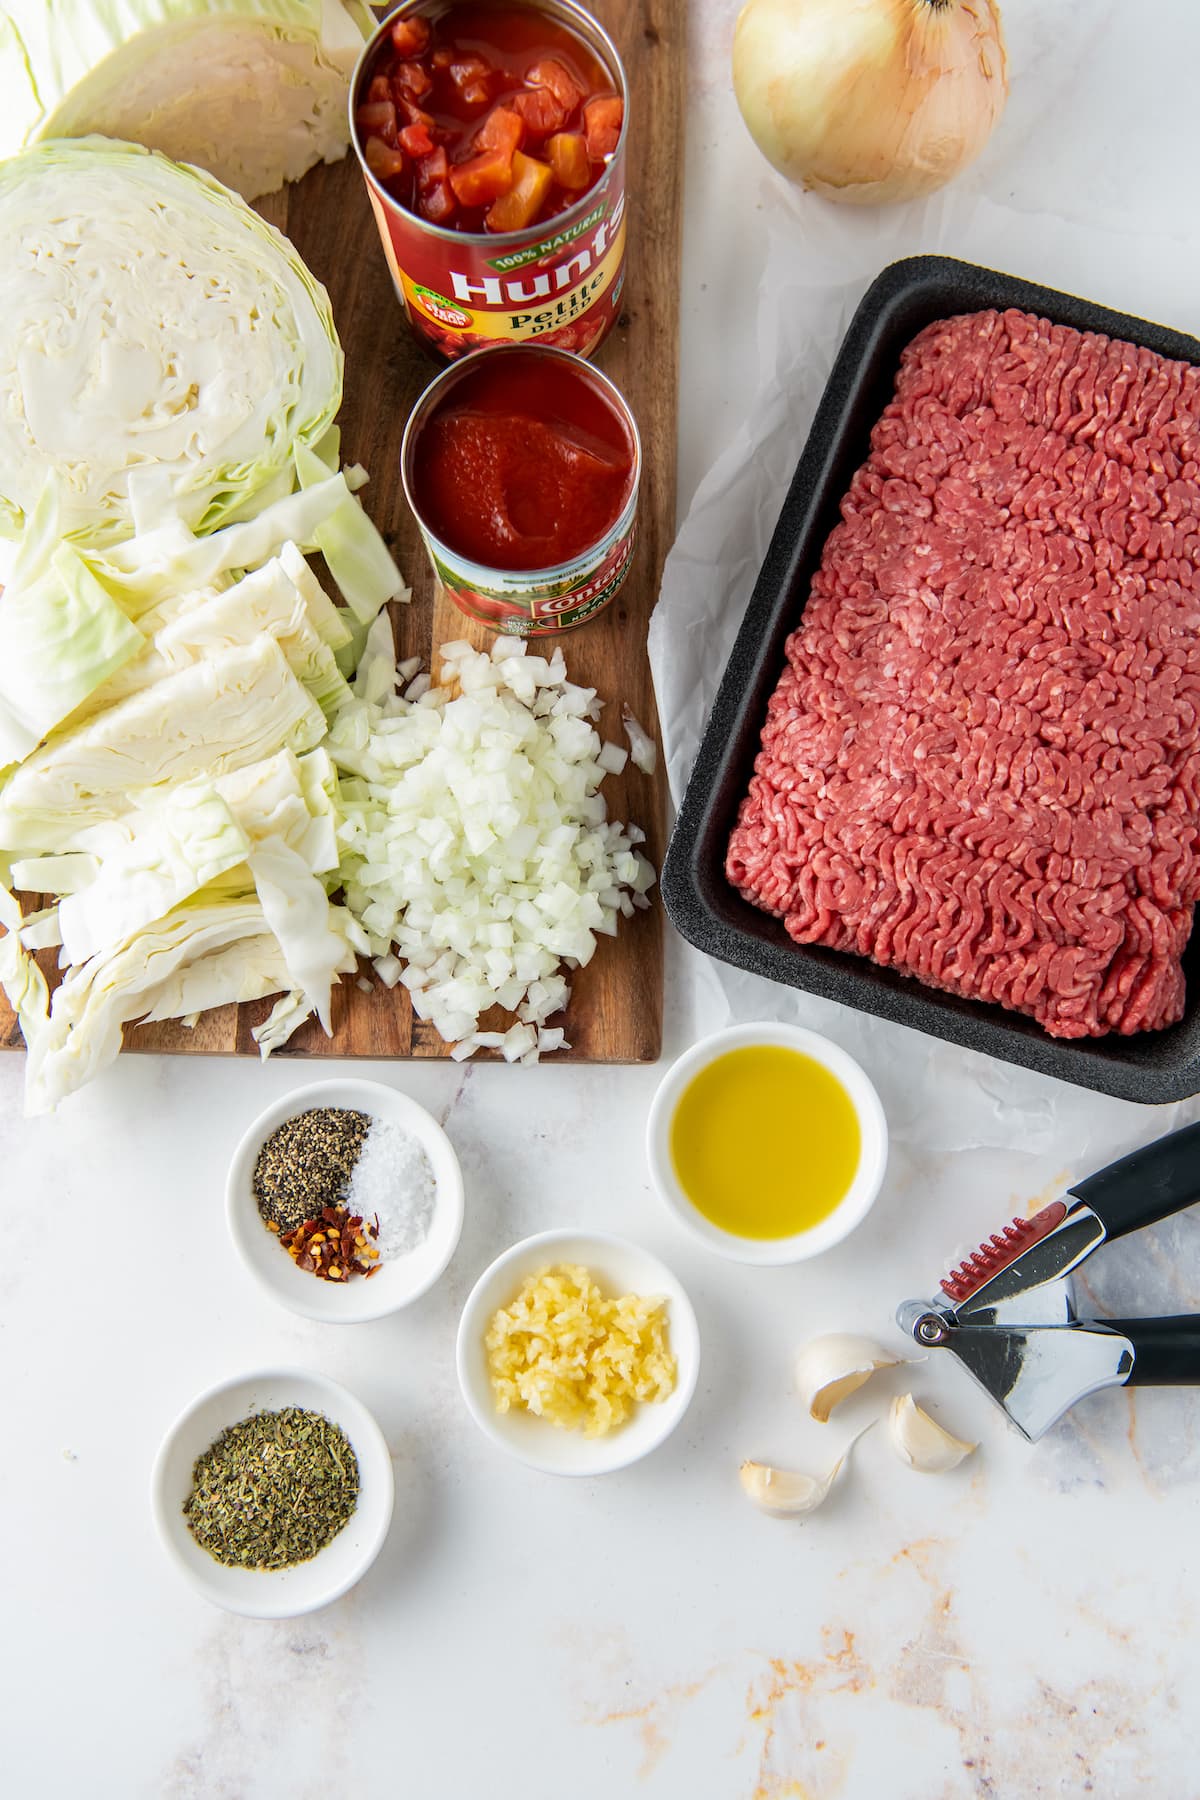 ingredients to make unstuffed cabbage dinner with ground beef, cabbage, onion, garlic, oil, and seasonings